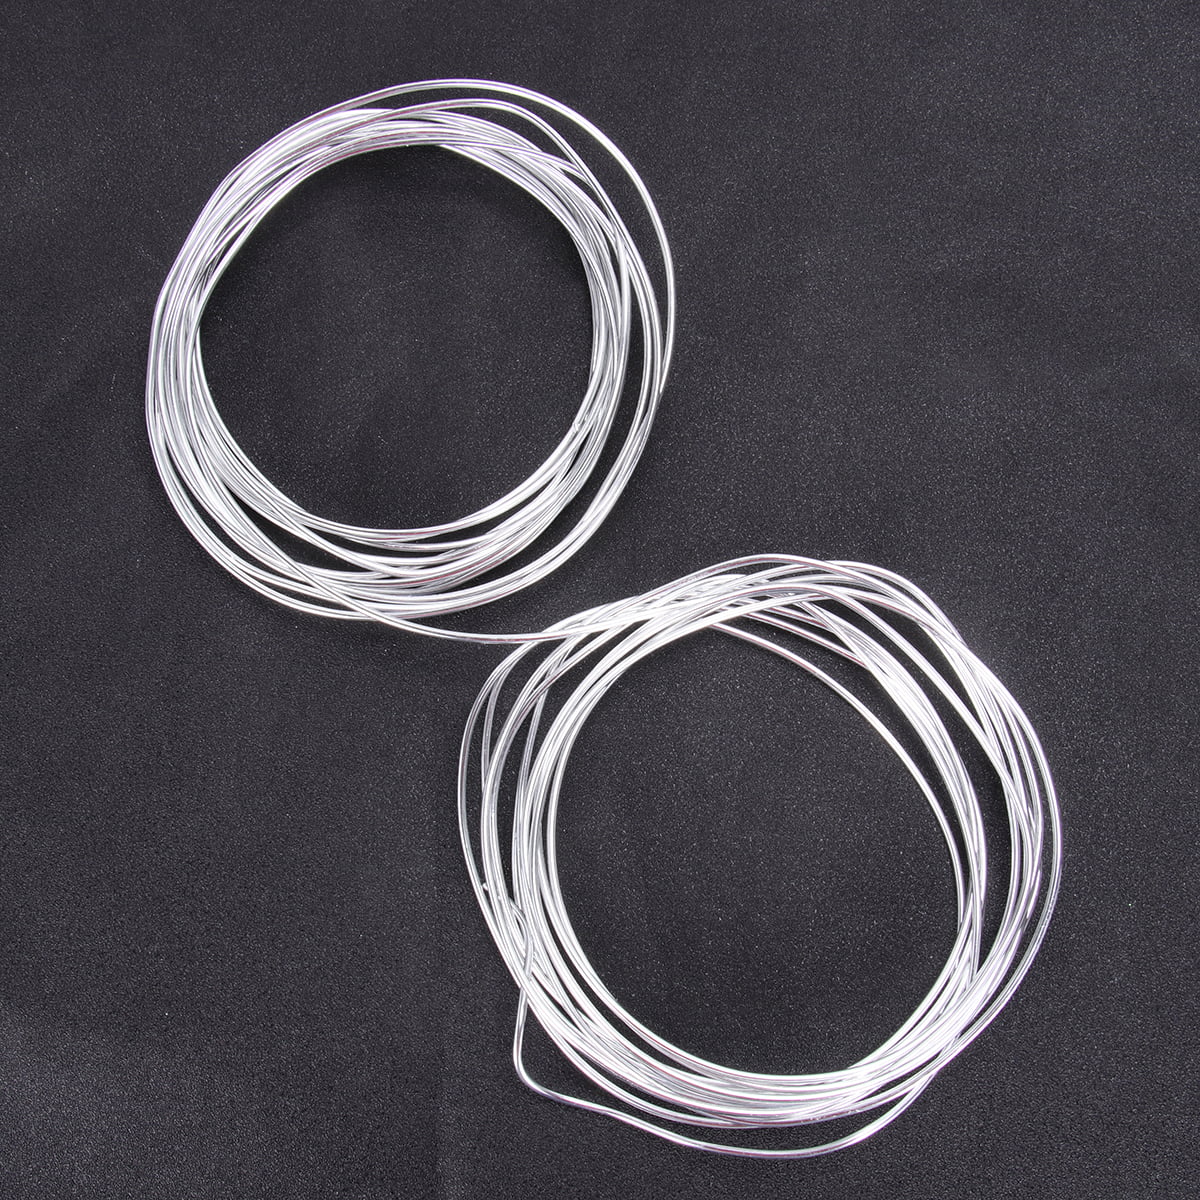 SEWACC 2pcs Soft Iron Wire Bendable Metal Wire Skeleton Wire Bendable Wire  for Crafts Dead Copper Wire Iron Wire for Crafts Skeleton Making Wire